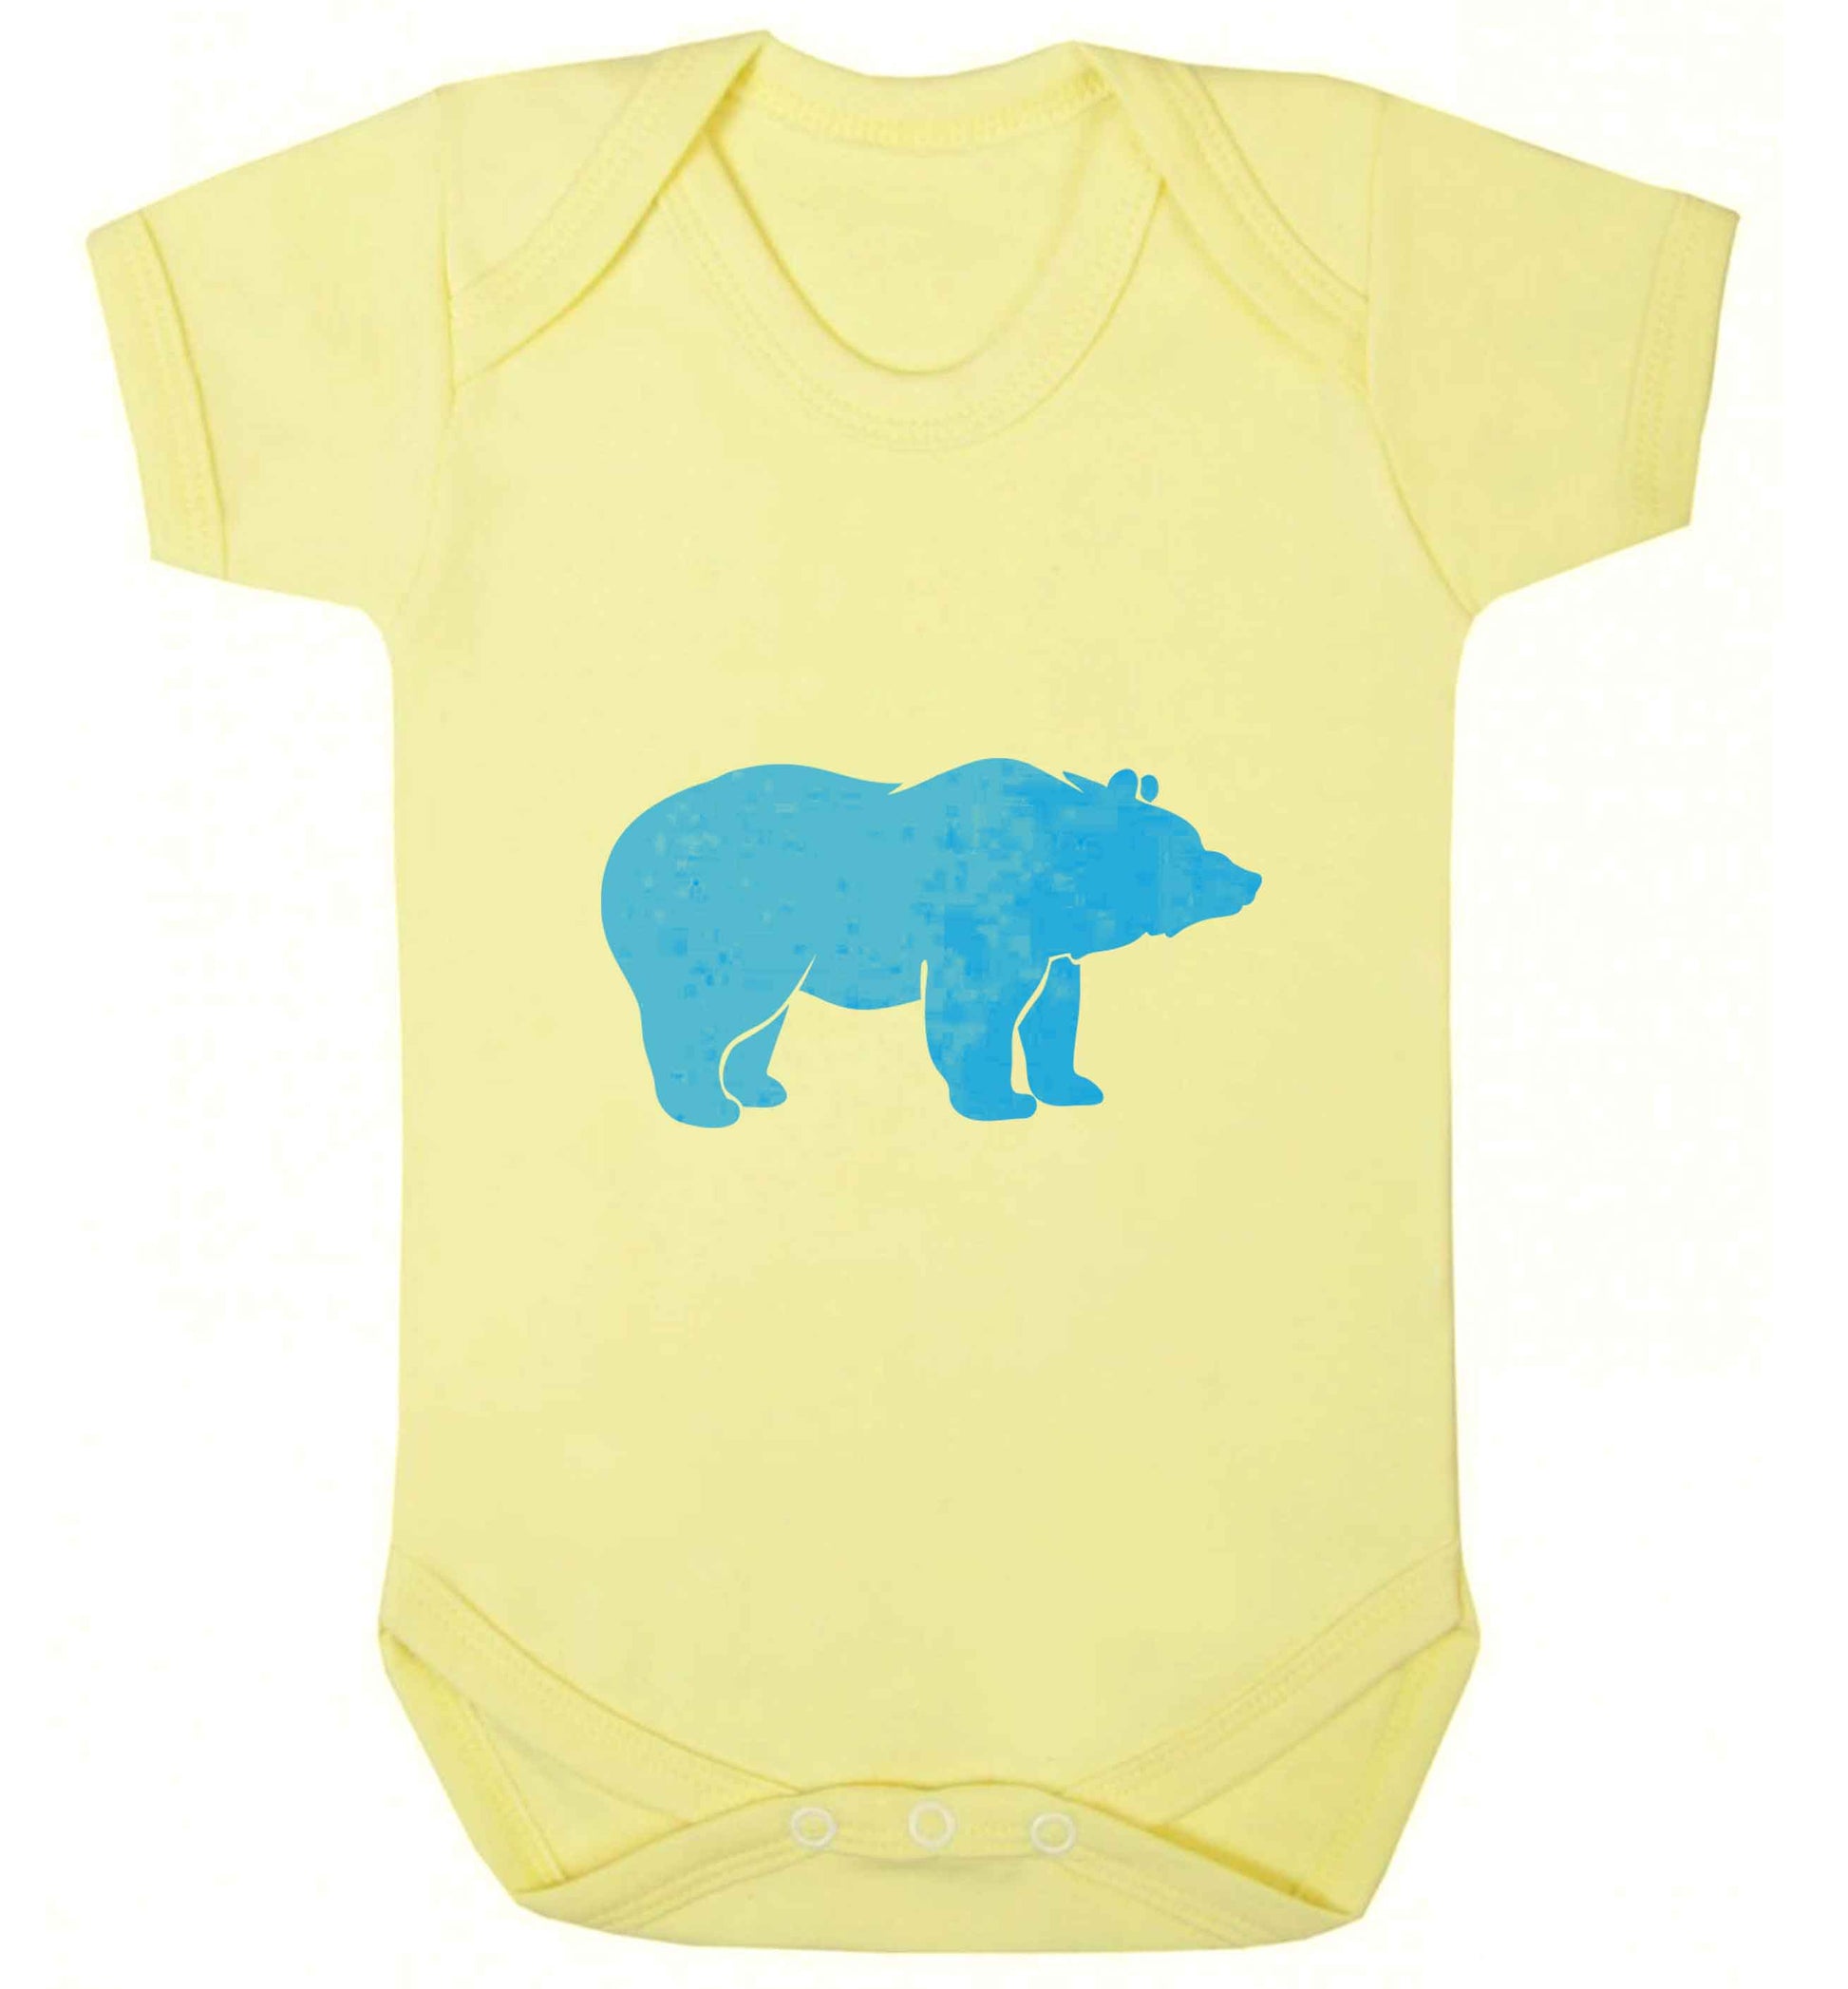 Blue bear baby vest pale yellow 18-24 months